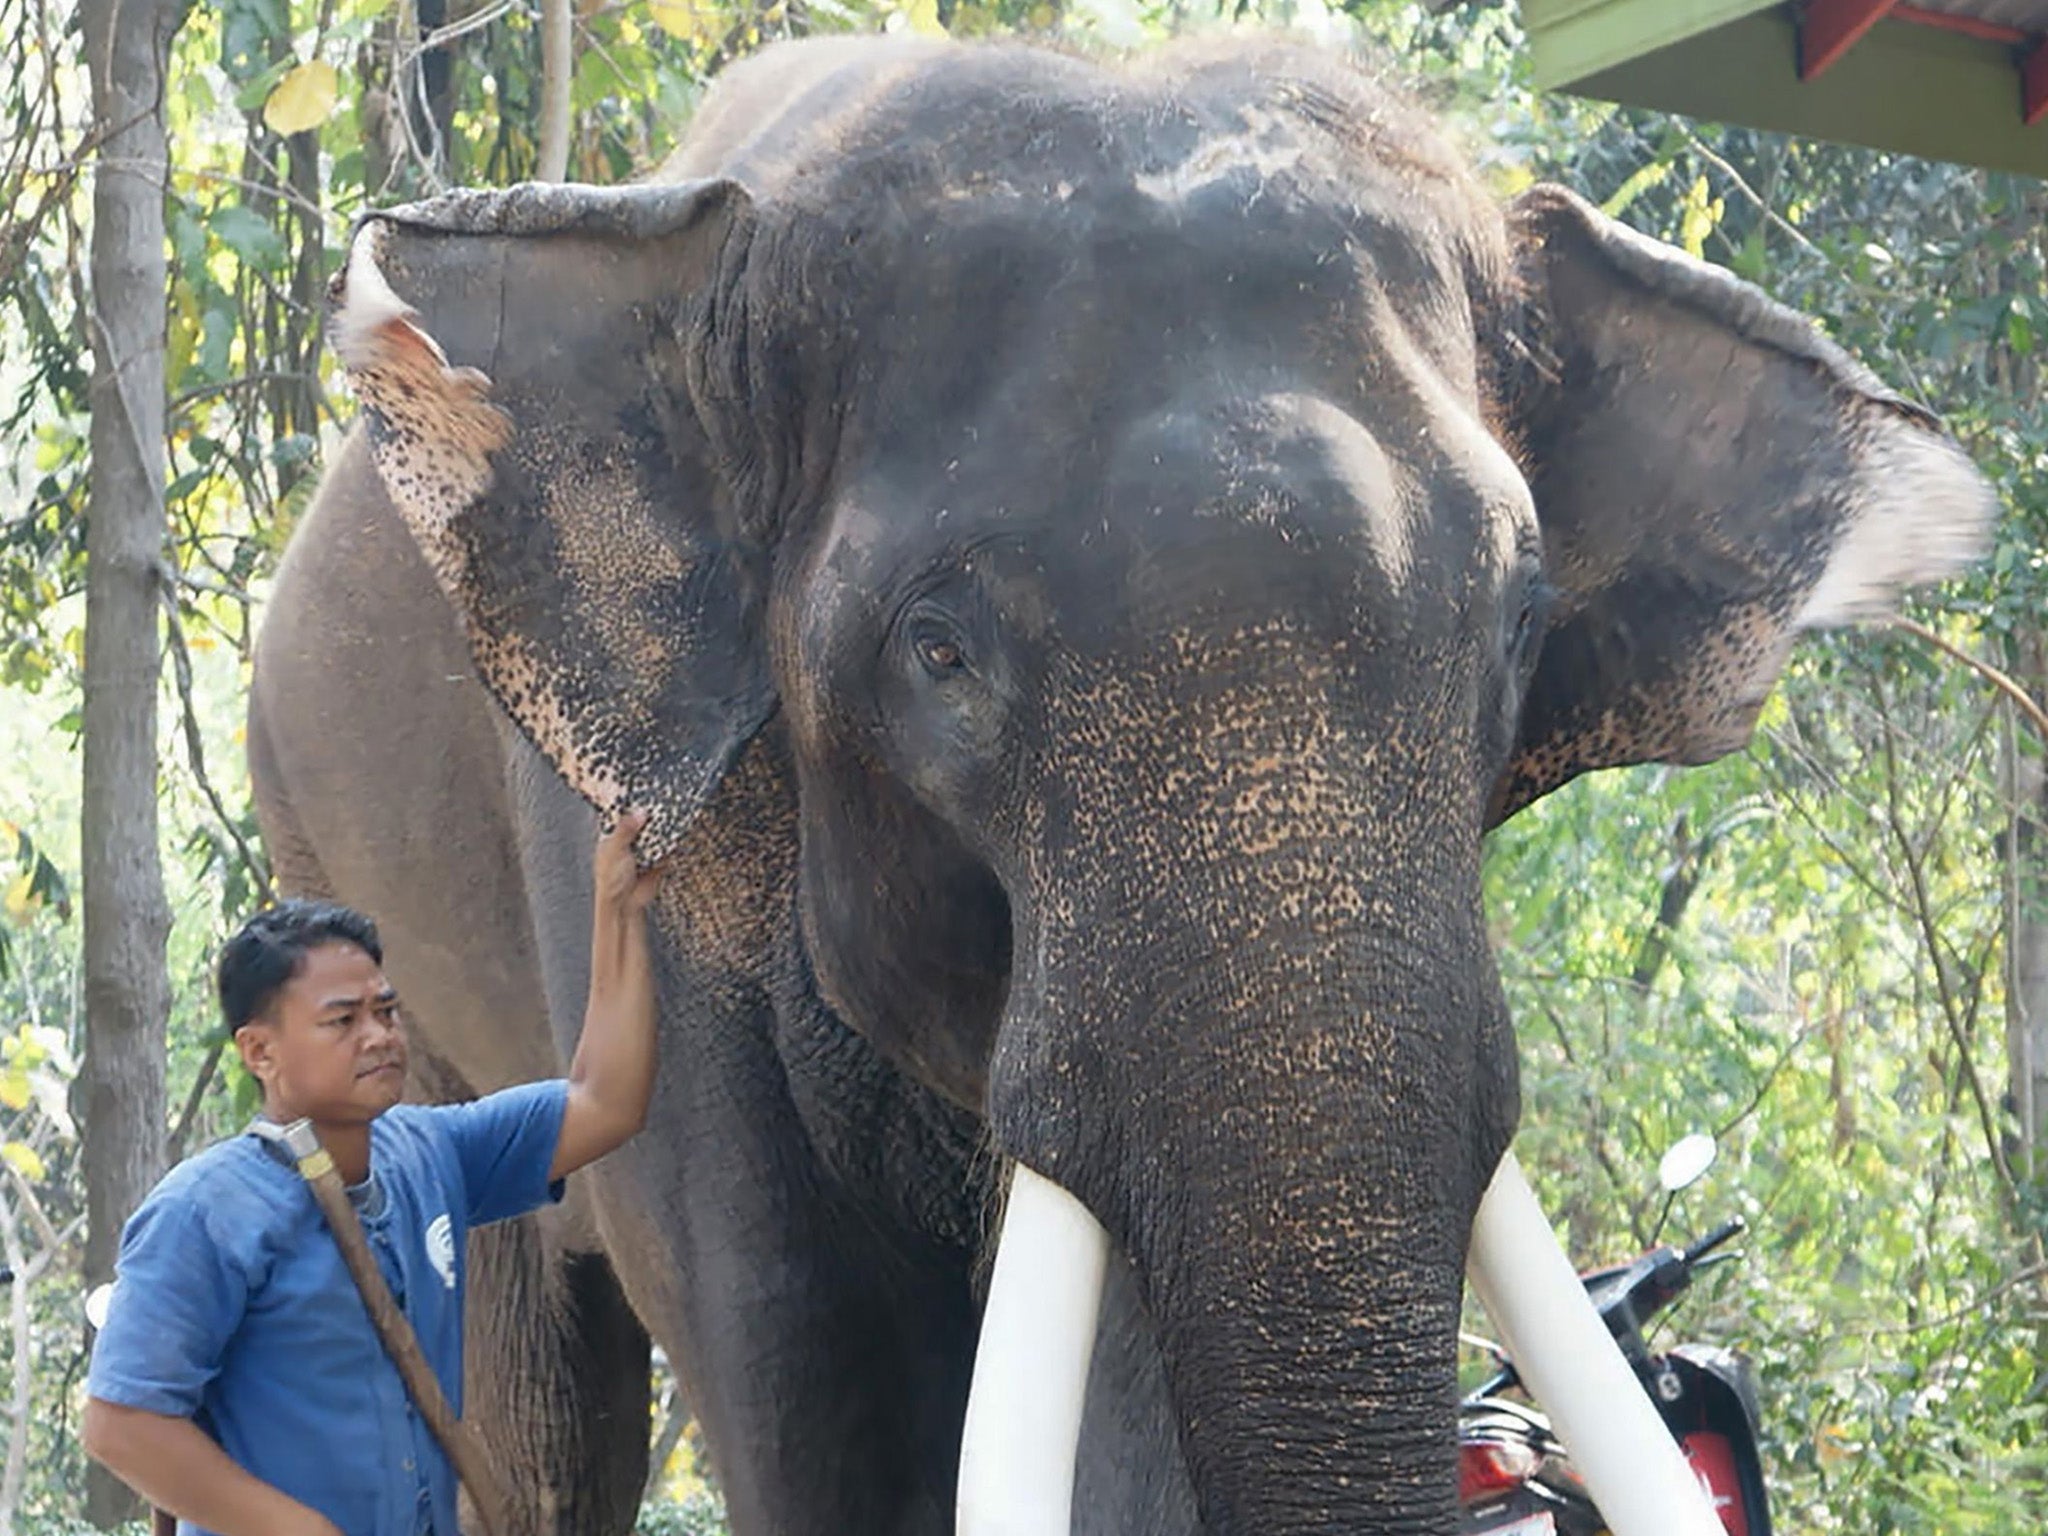 Elephant 'Ekasit', who killed his owner Somsak Riengngen, standing next to one of the zoo's handlers in Chiang Mai Zoo